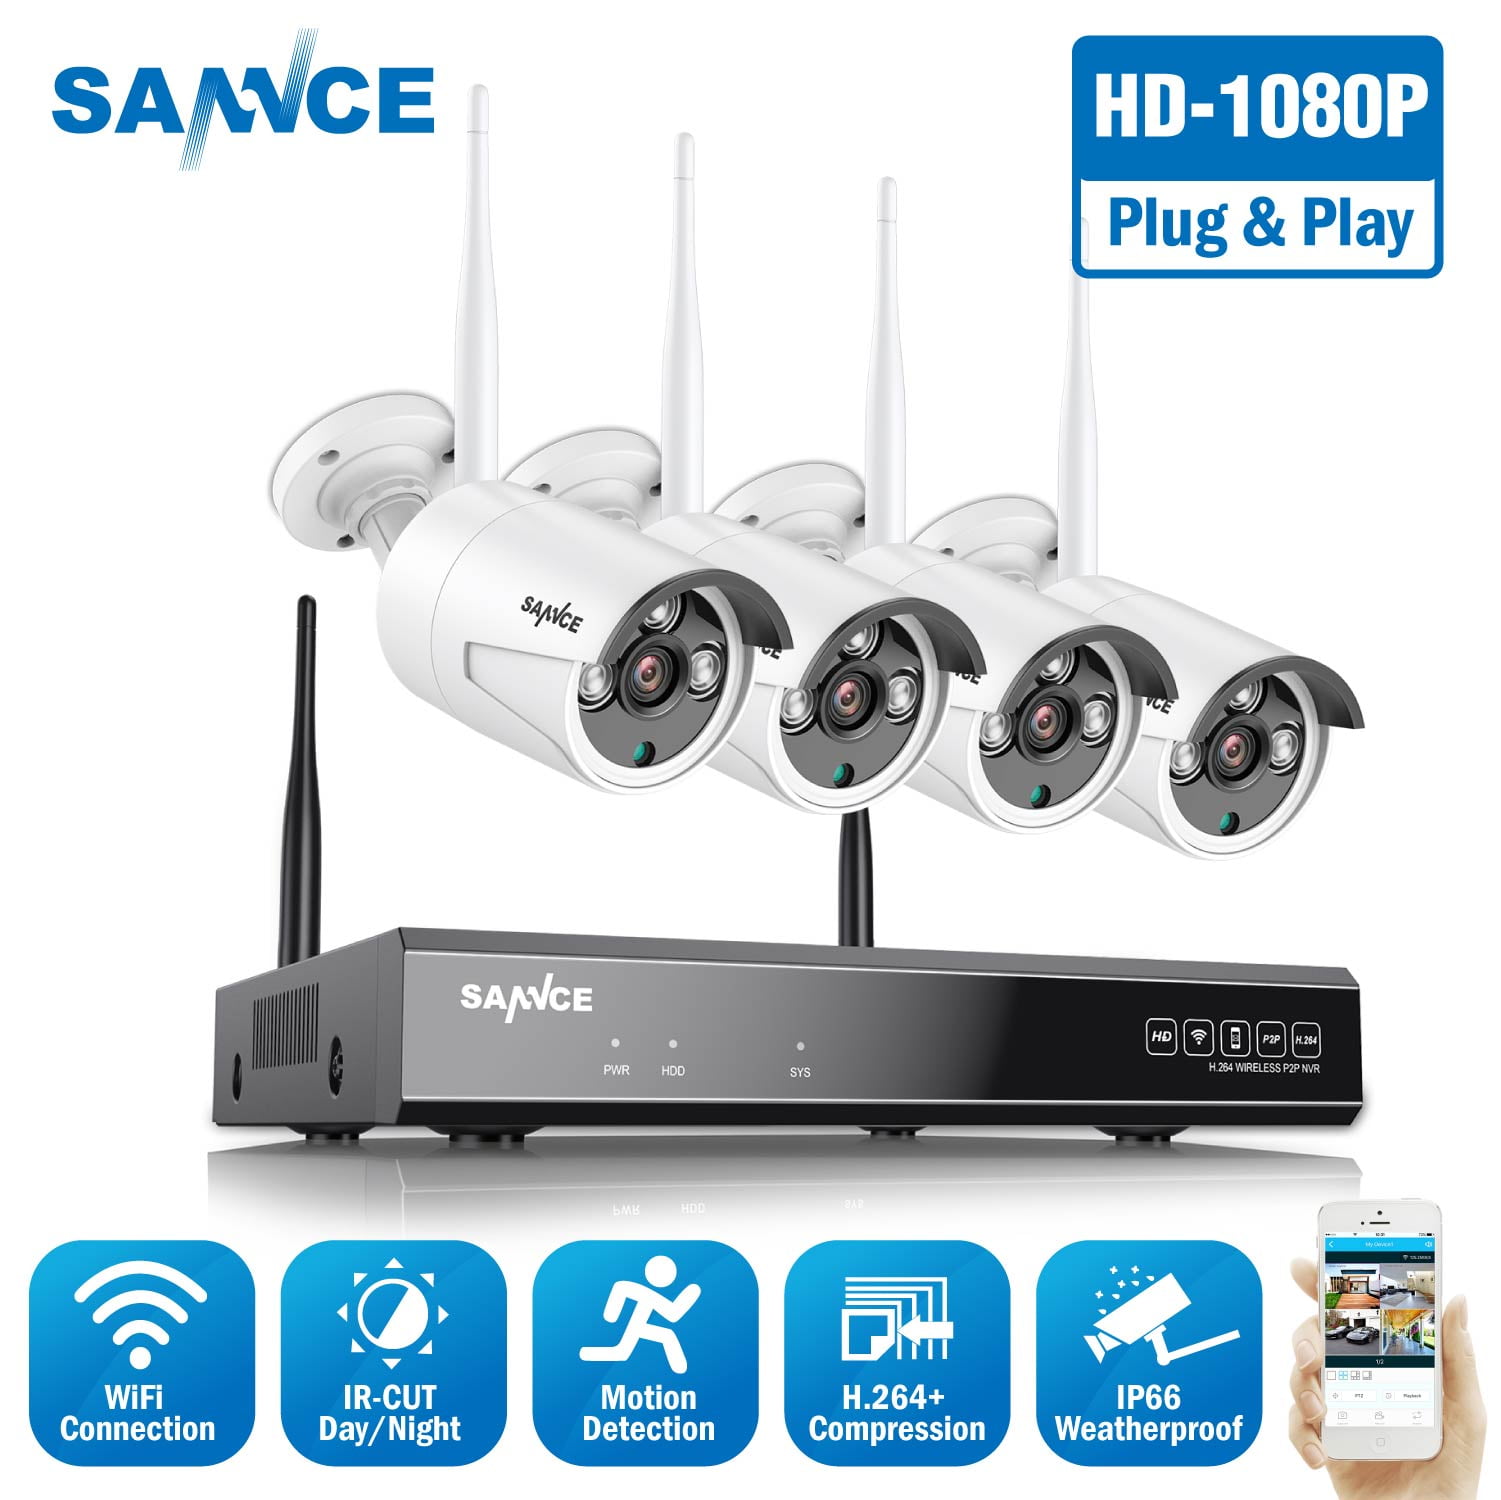 ANNKE 4CH Wireless Home Security Camera System 4 Channel 960P Video Surveillance CCTV NVR Kit 4 720P Wireless Outdoor Indoor WiFi IP Camera 100ft Night Vision 1TB HDD Motion Detection Remote Viewing